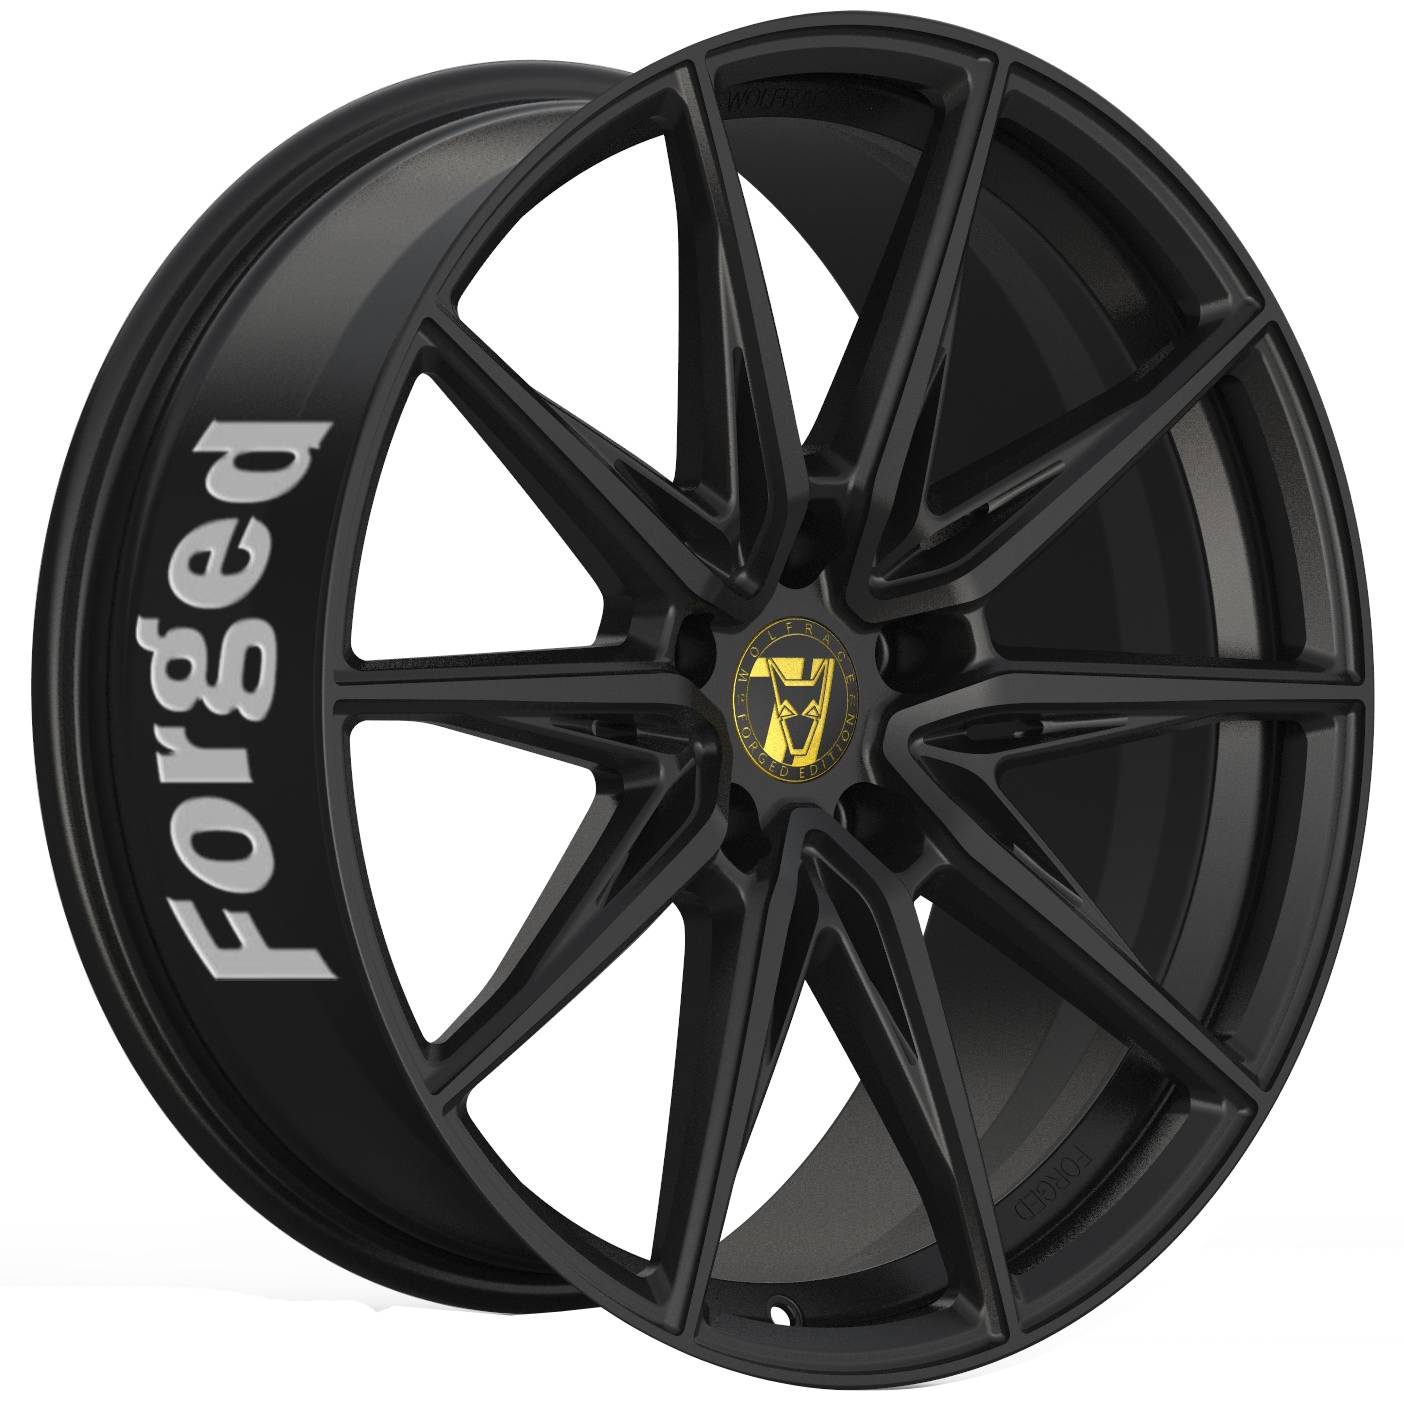 Demon Wheels 71 Forged Edition Urban Racer Forged [11x24] -5x112- ET 20